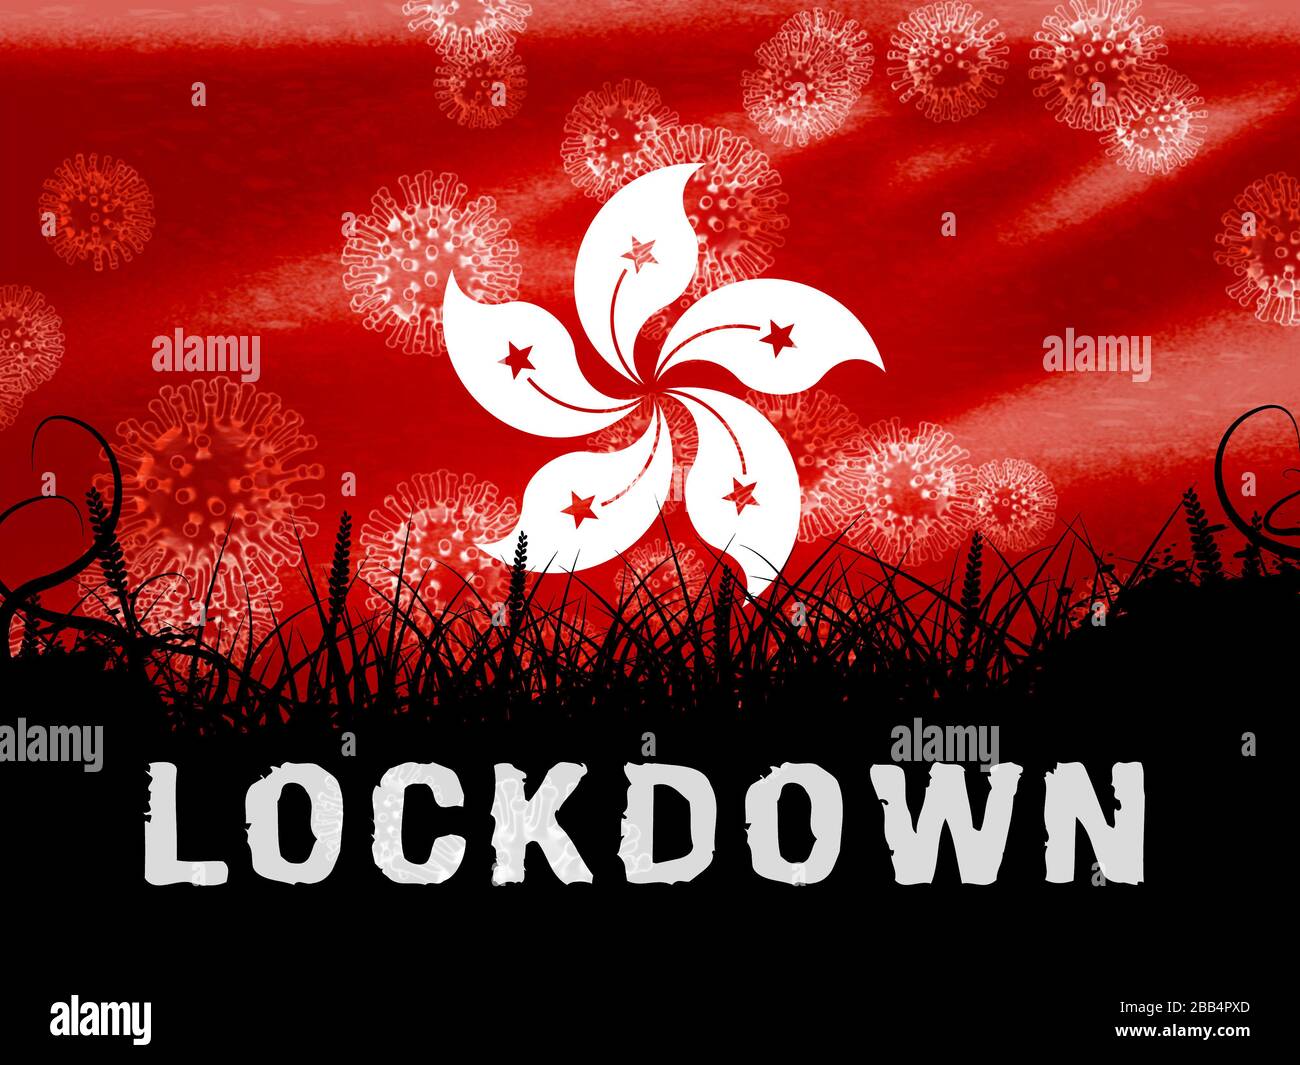 Hong Kong lockdown preventing covid19 spread and outbreak. Covid 19 HK precaution to lock down virus infection - 3d Illustration Stock Photo